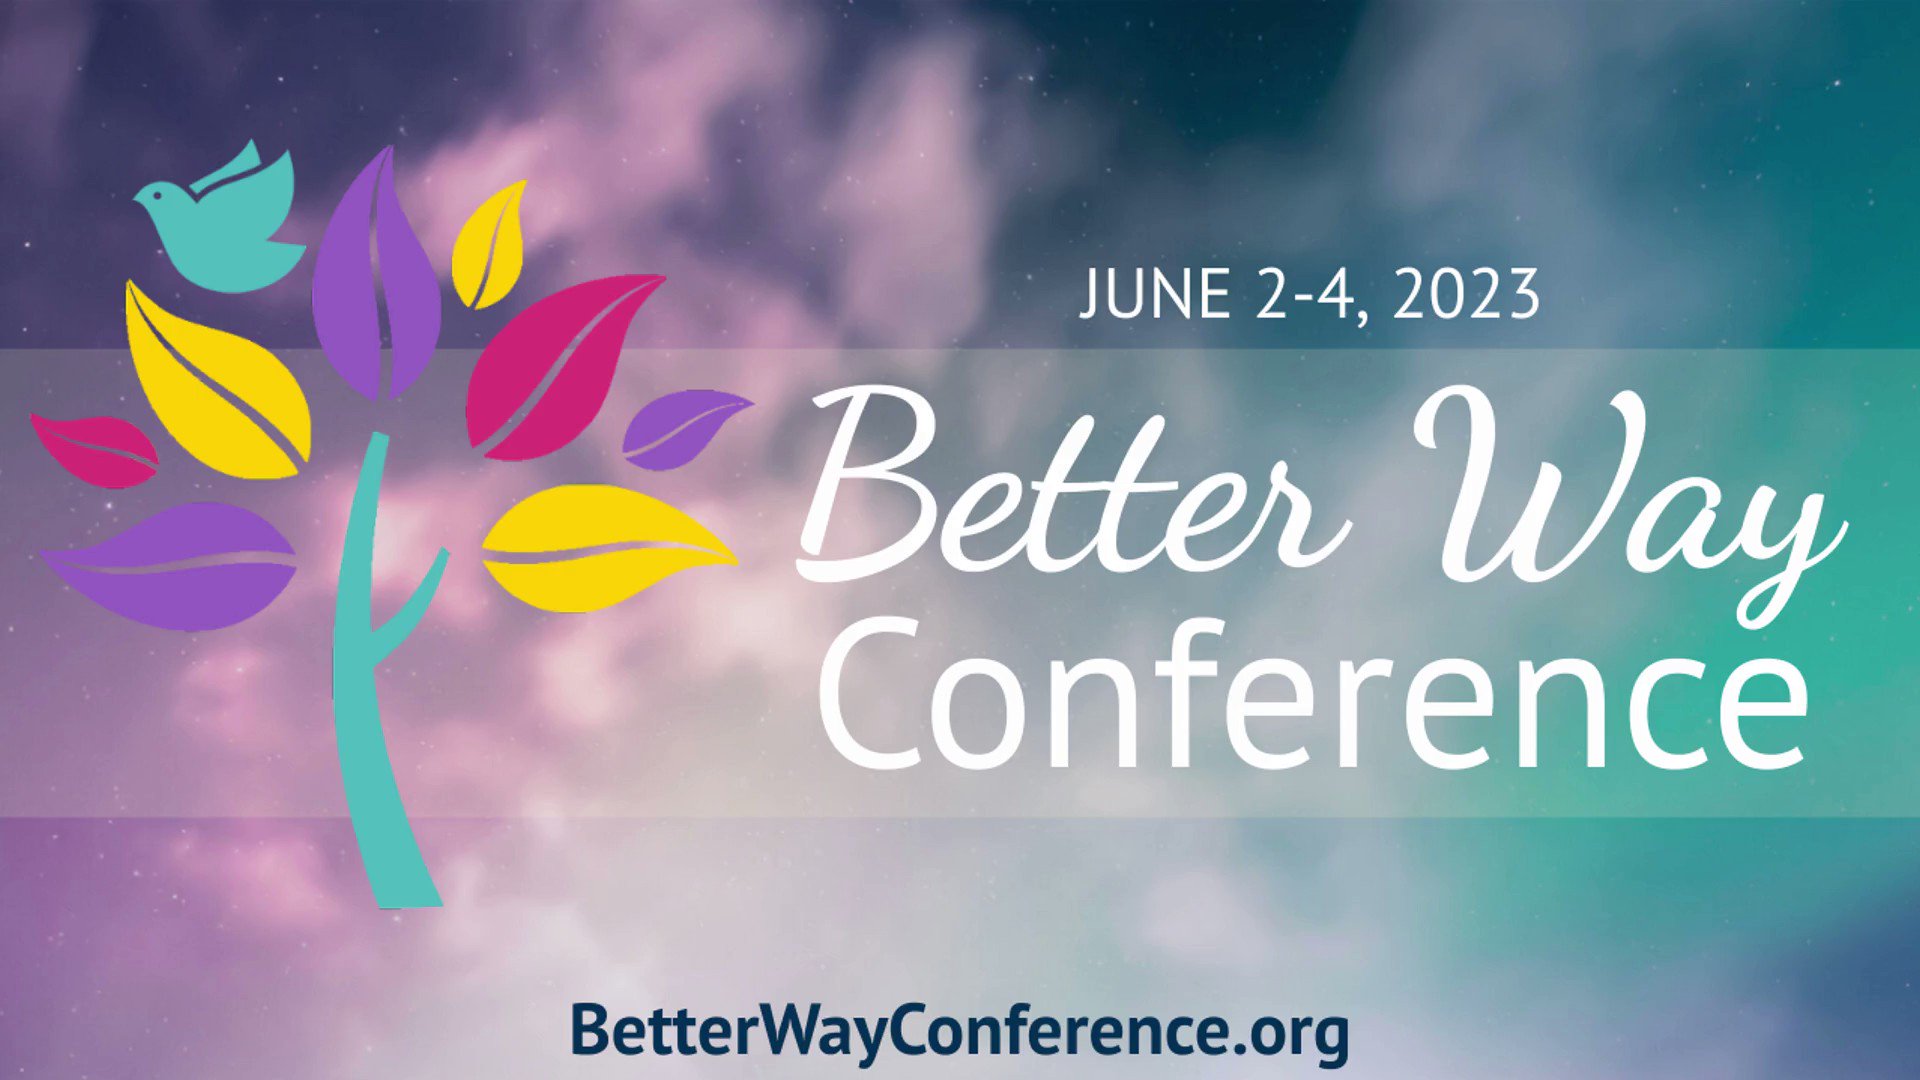 BETTER WAY CONFERENCE 2023 LOGO